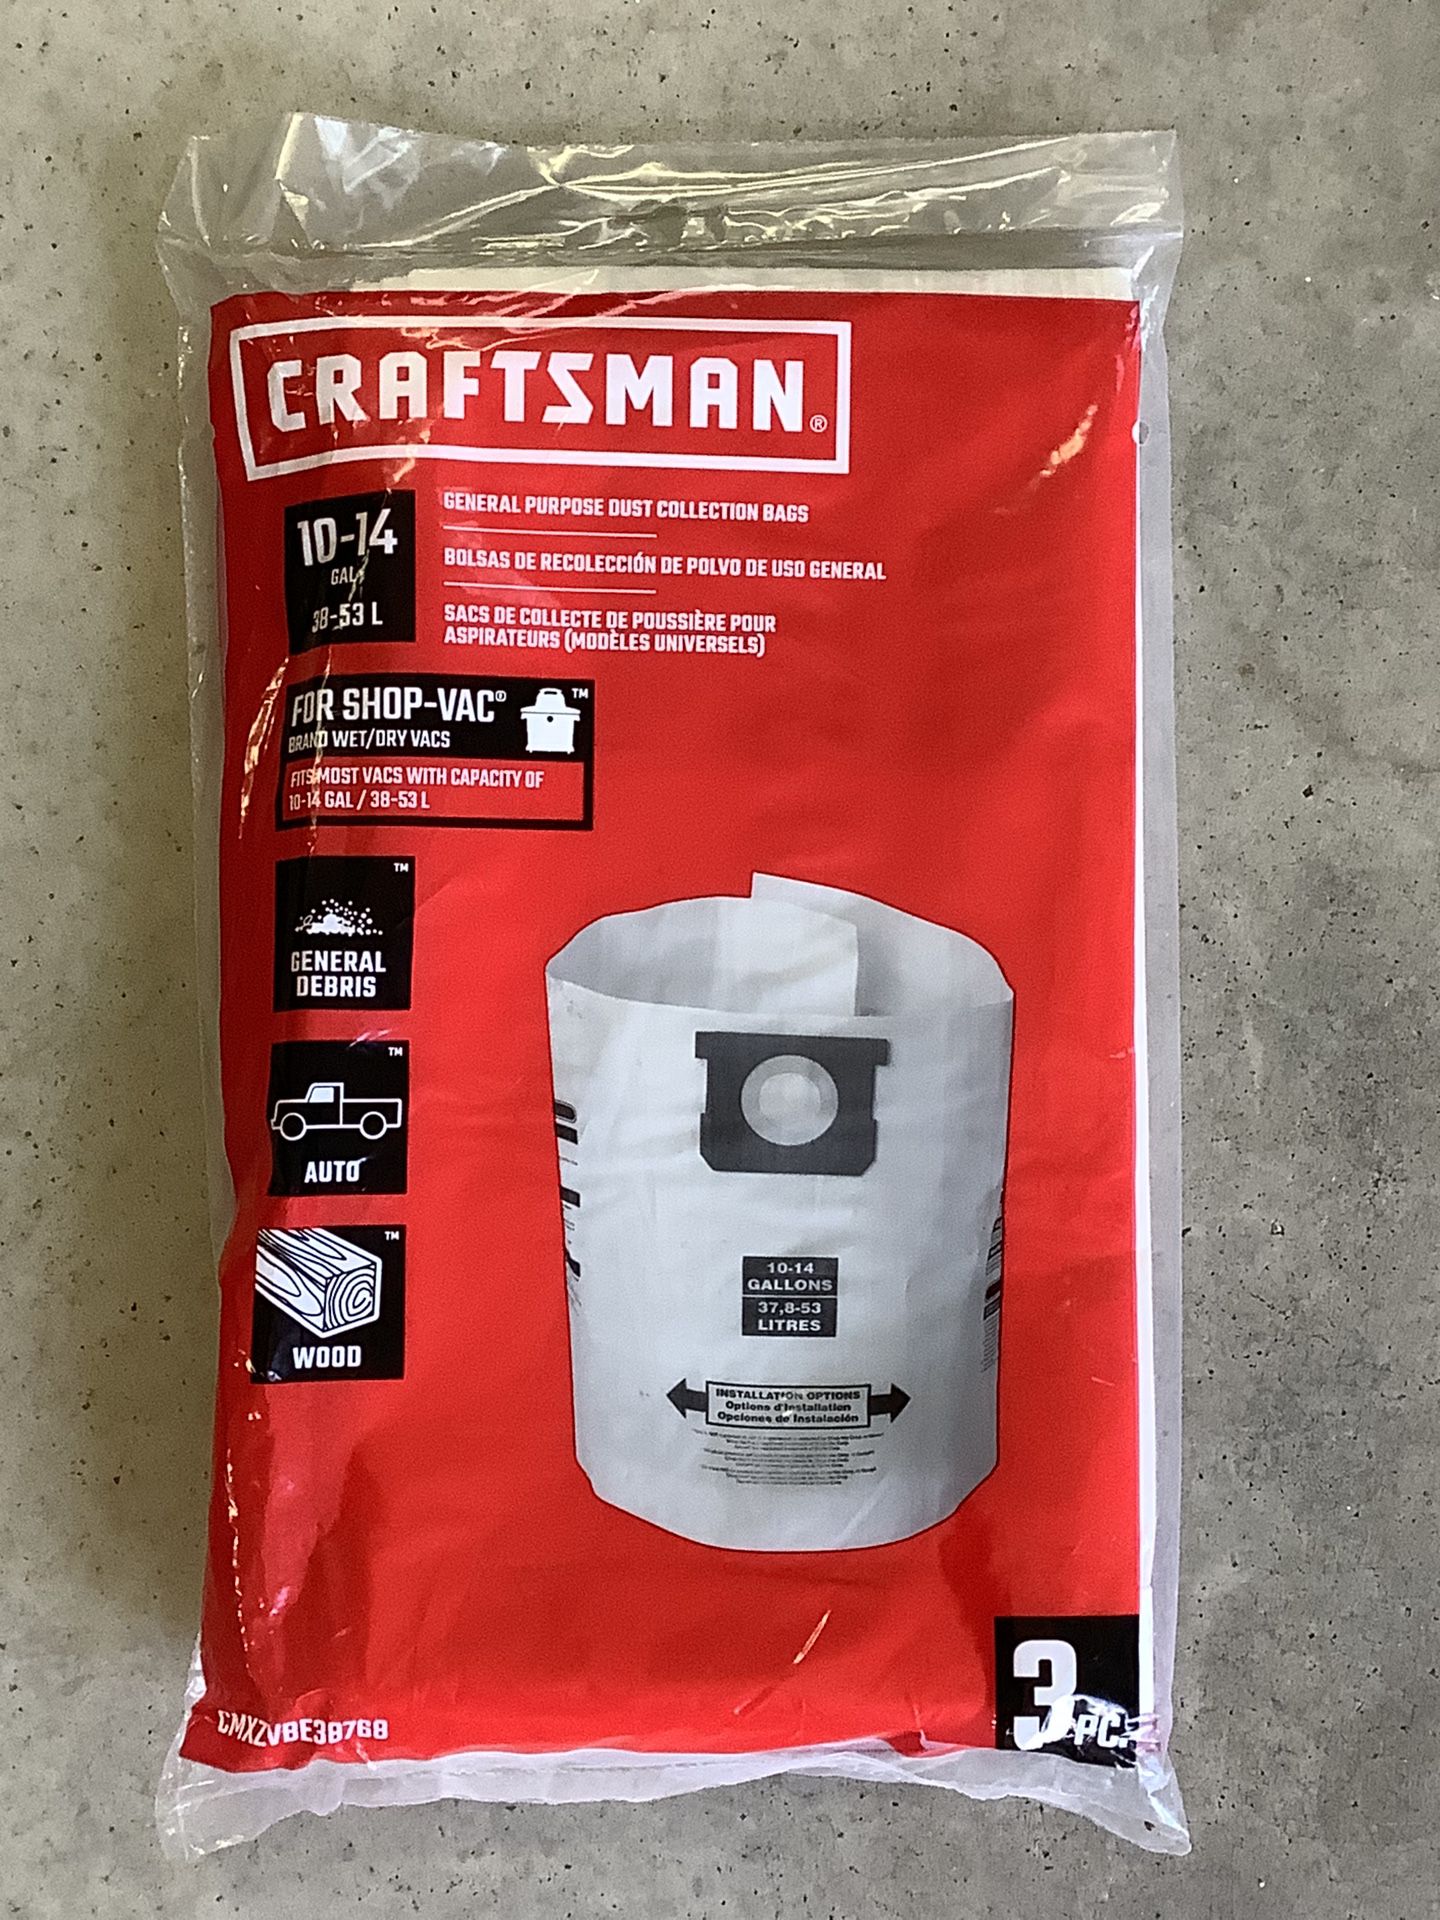 Craftsman 10-14 Gallon Shop Vac Bags. These Are New.